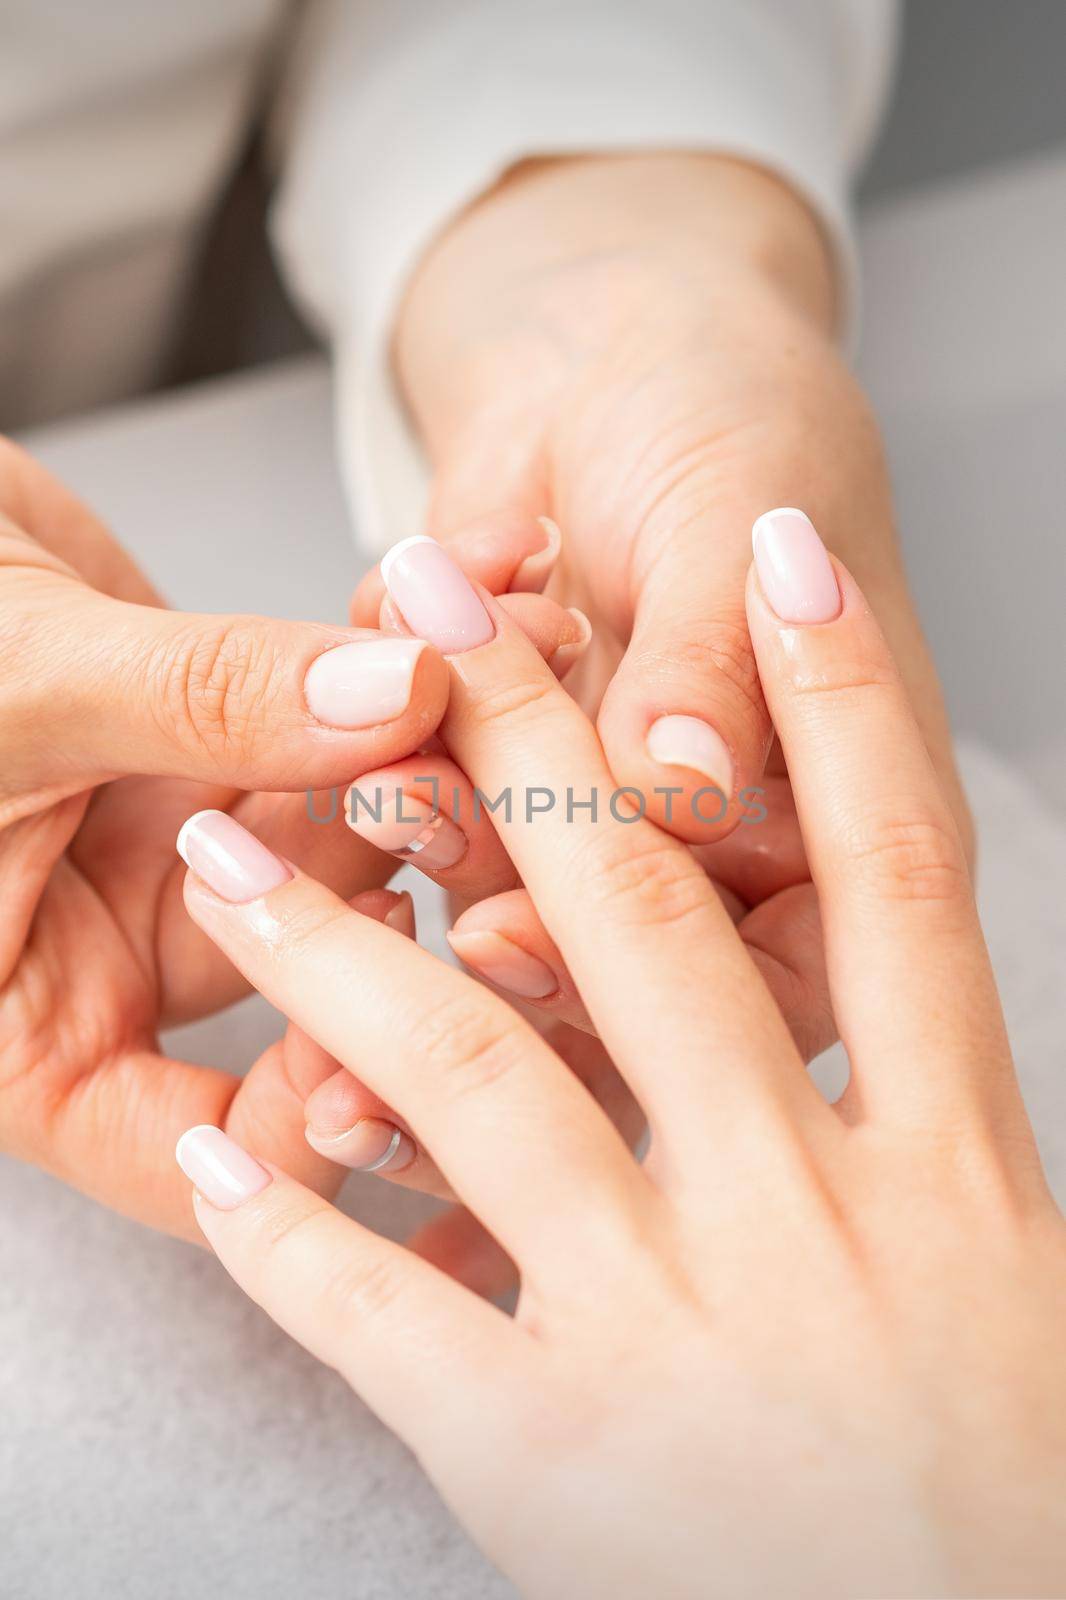 Manicure treatment at beauty spa. A hand of a woman getting a finger massage with oil in a nail salon. by okskukuruza